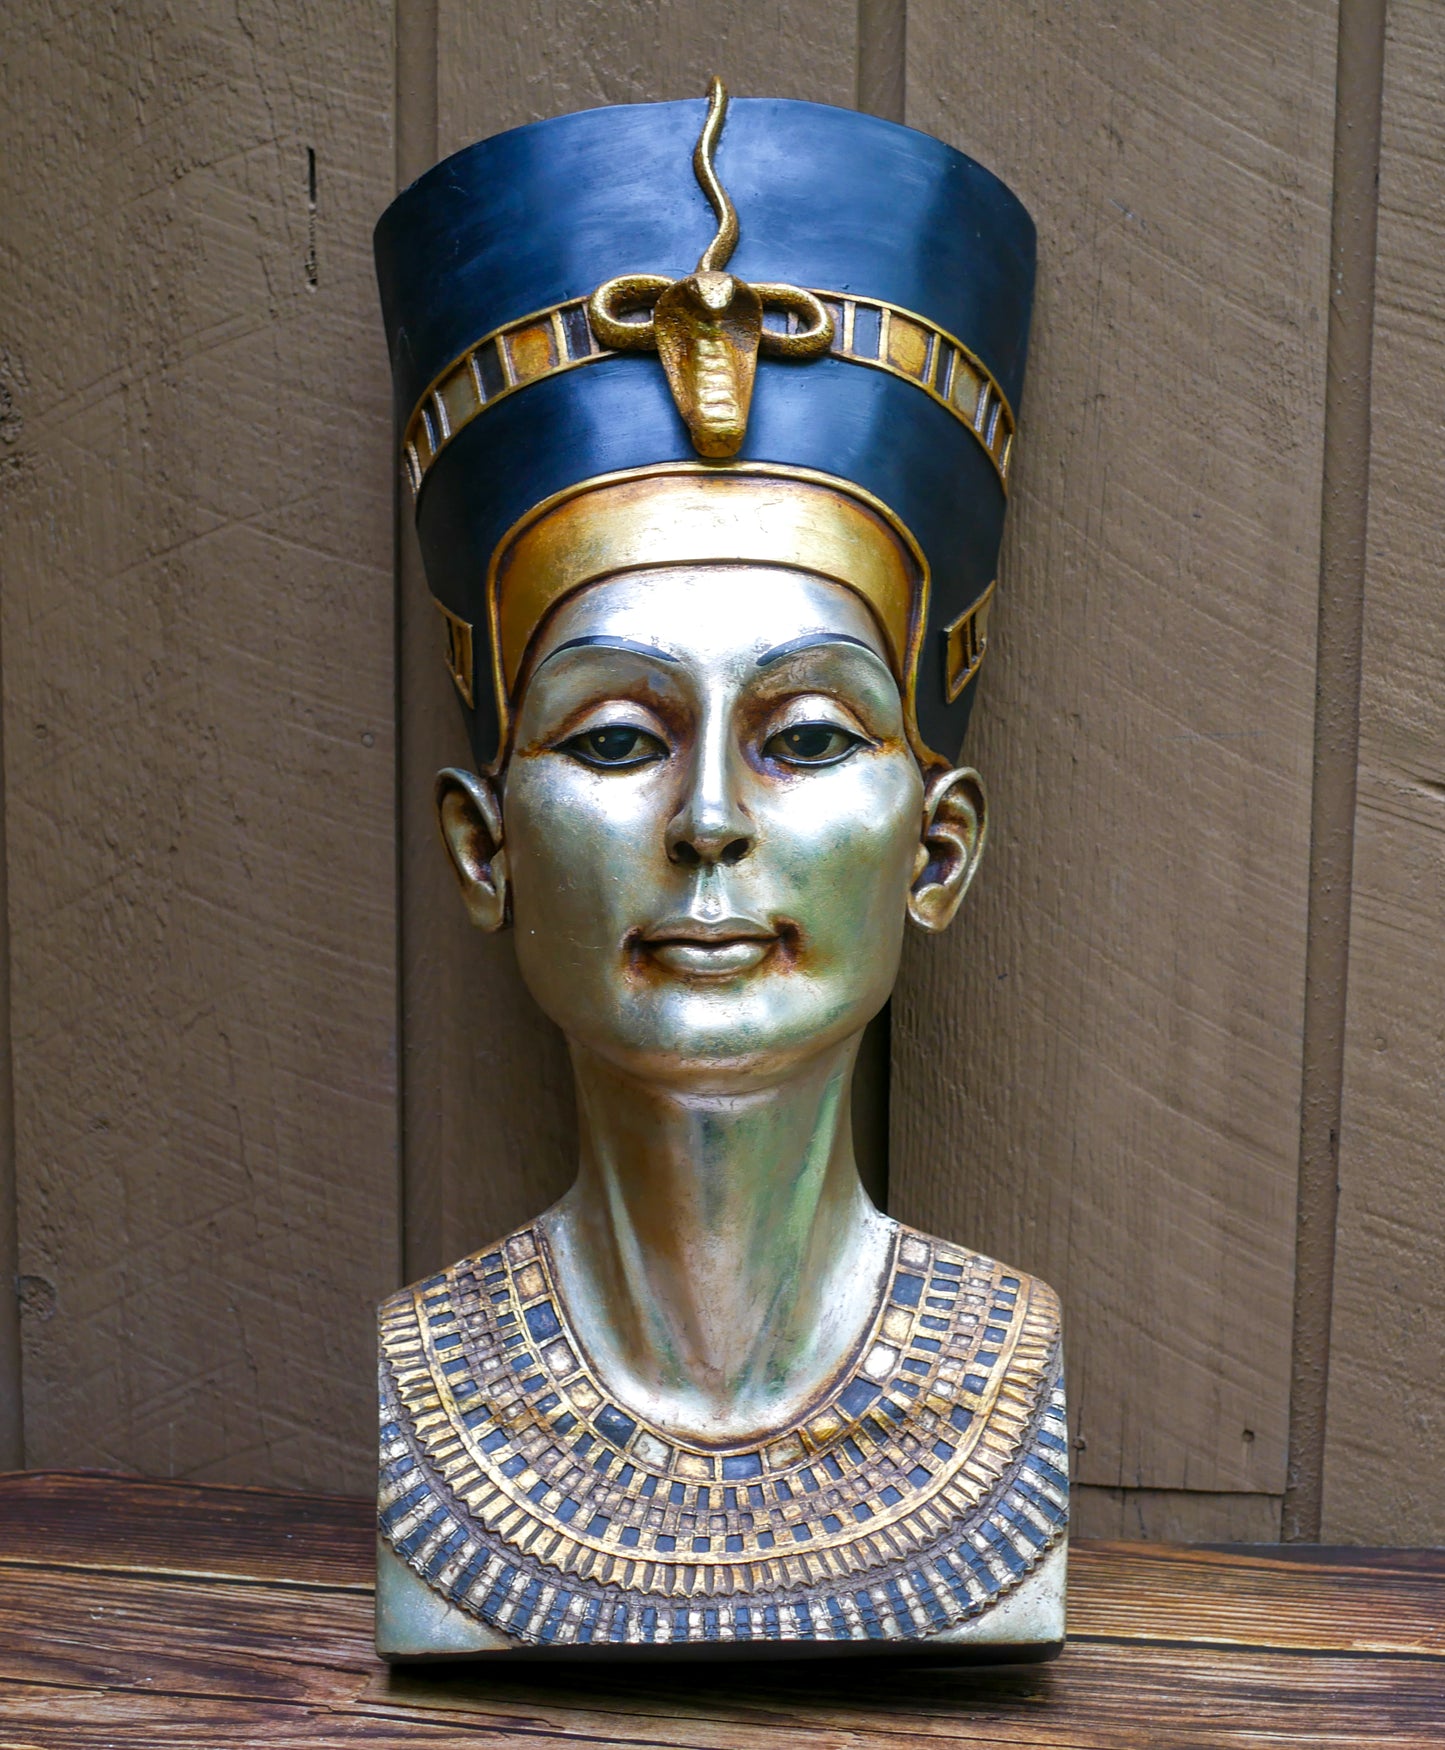 Vintage Large Grand-Scale Egyptian Queen Nefertiti Wall Hanging Decor 28" Tall